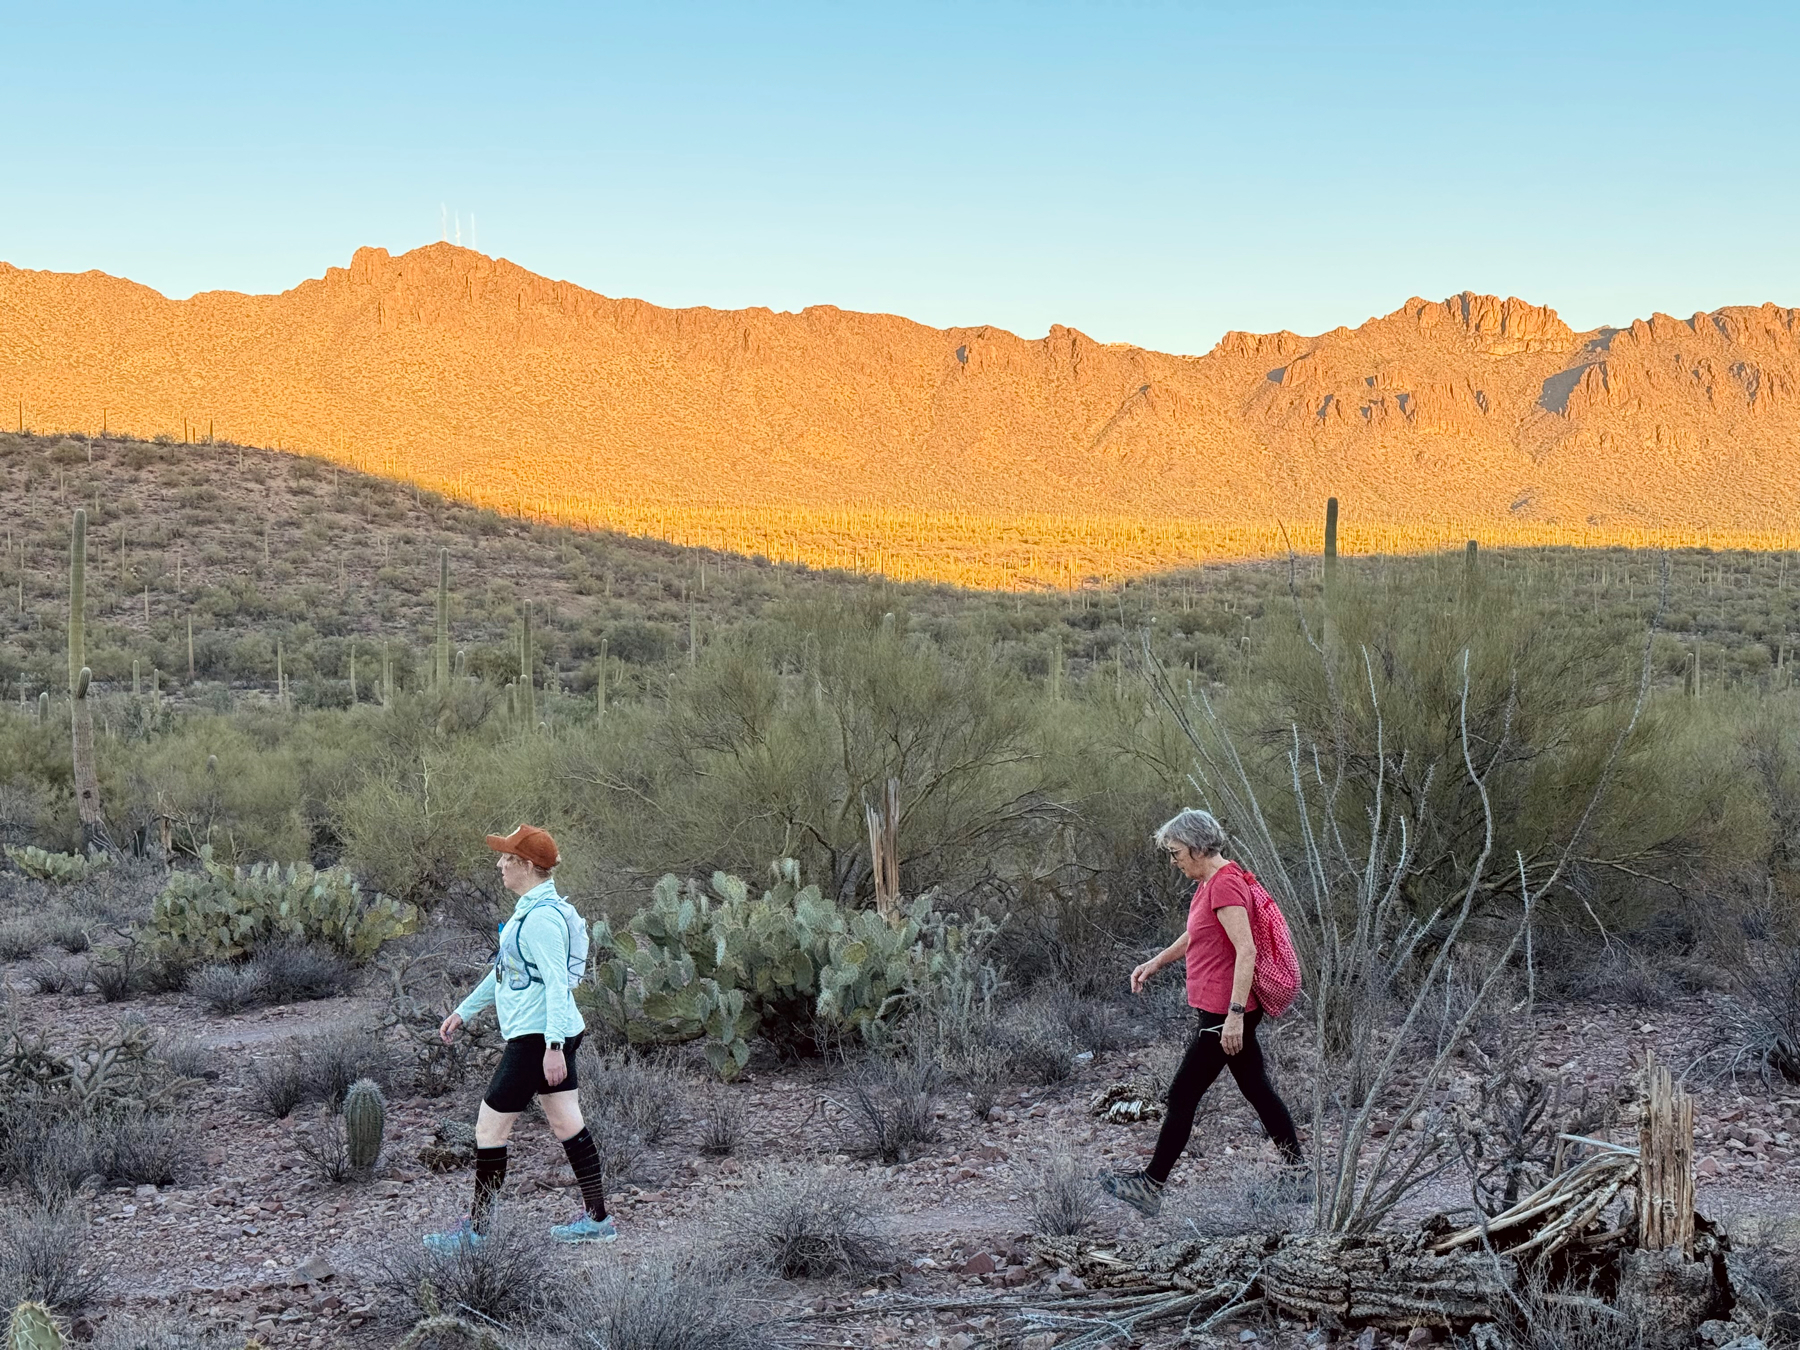 Two hikers trekking through a desert landscape with saguaro cacti, brush, and a mountain range in the background bathed in the warm sunlight of the setting Sun.